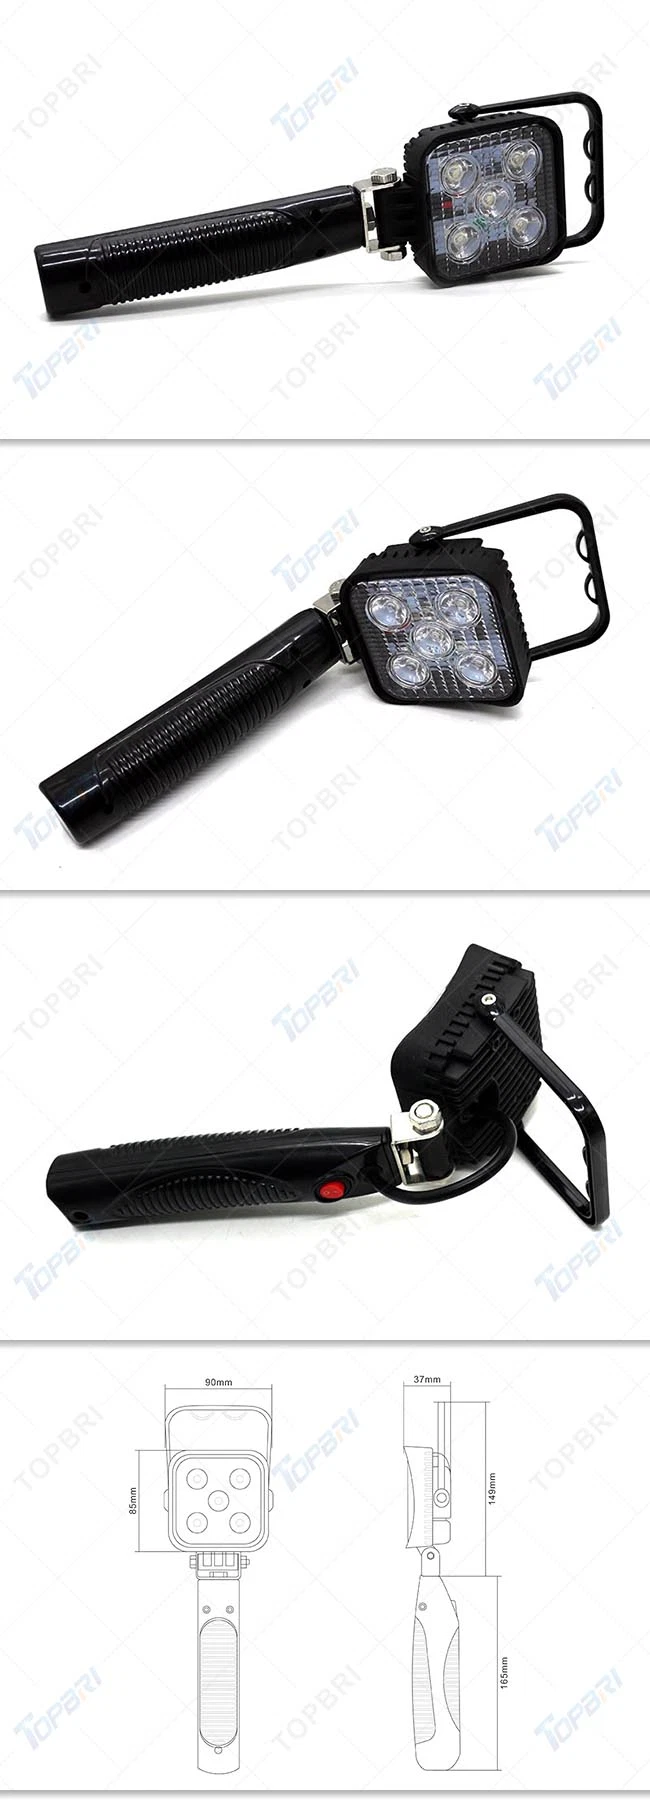 Torch Rechargeable Flashlight 15W Auto LED Hunting Search Lights